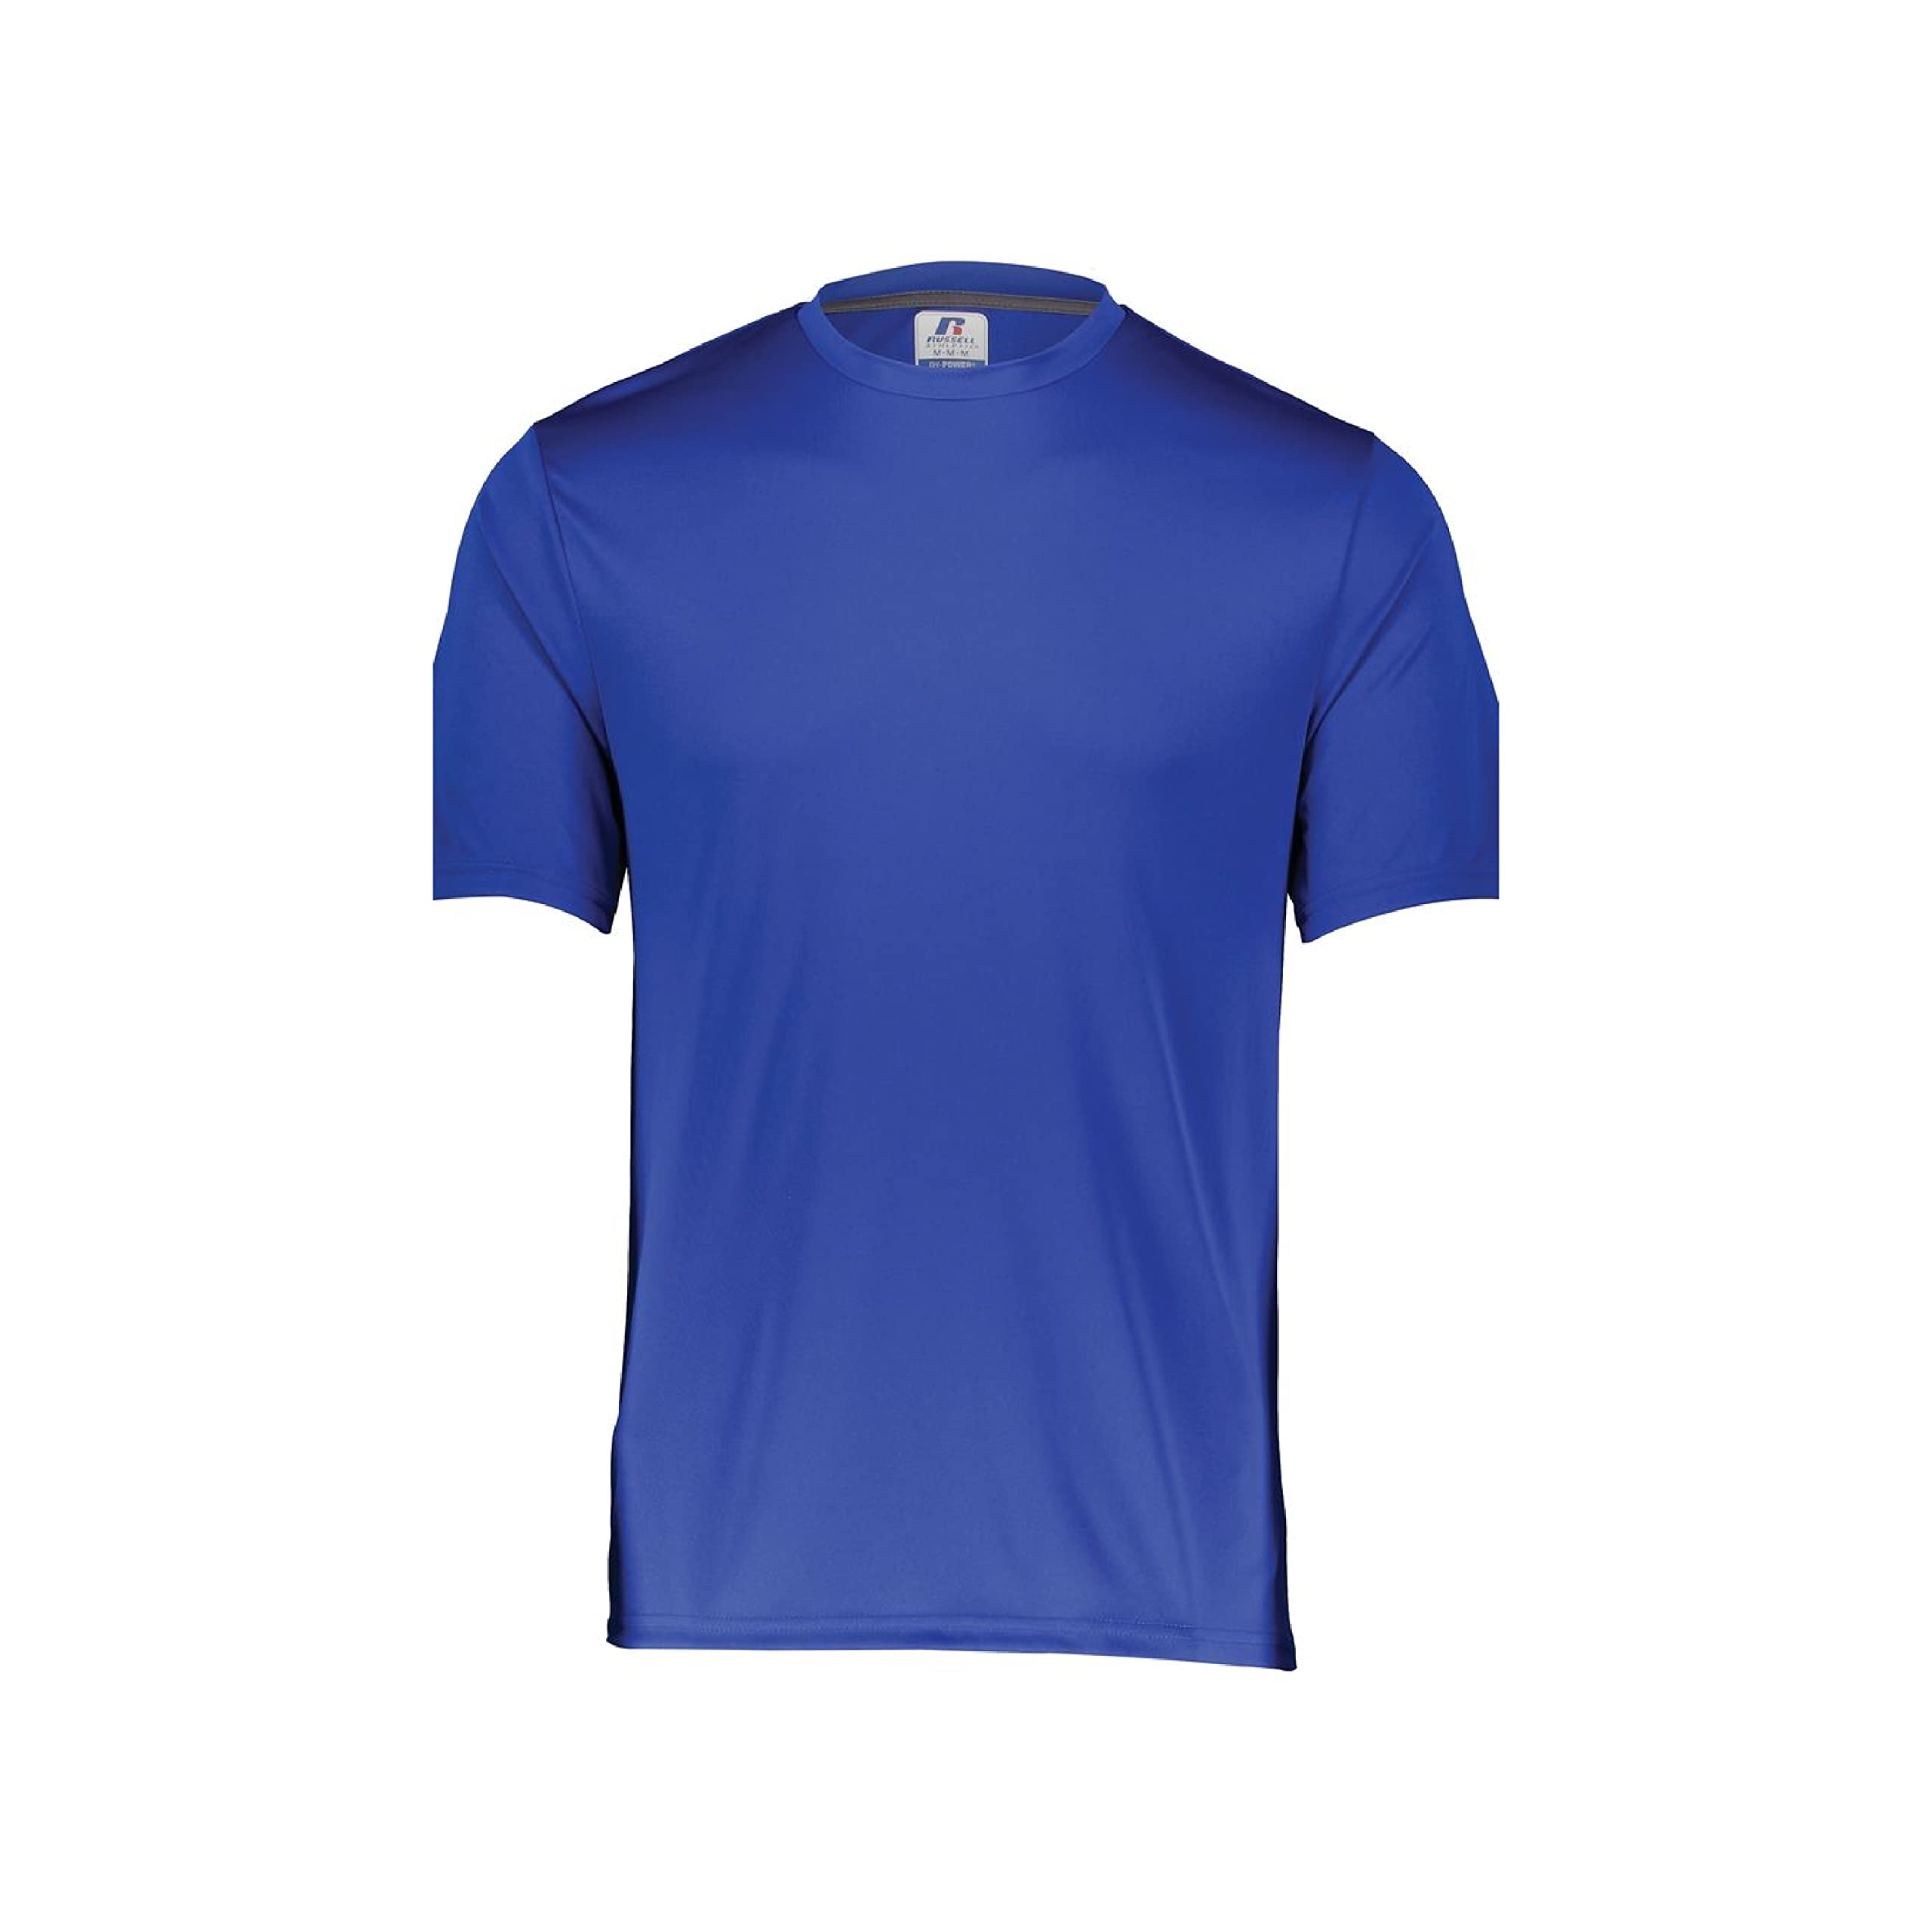 Russell Athletic Men's Short Sleeve Performance T-Shirt